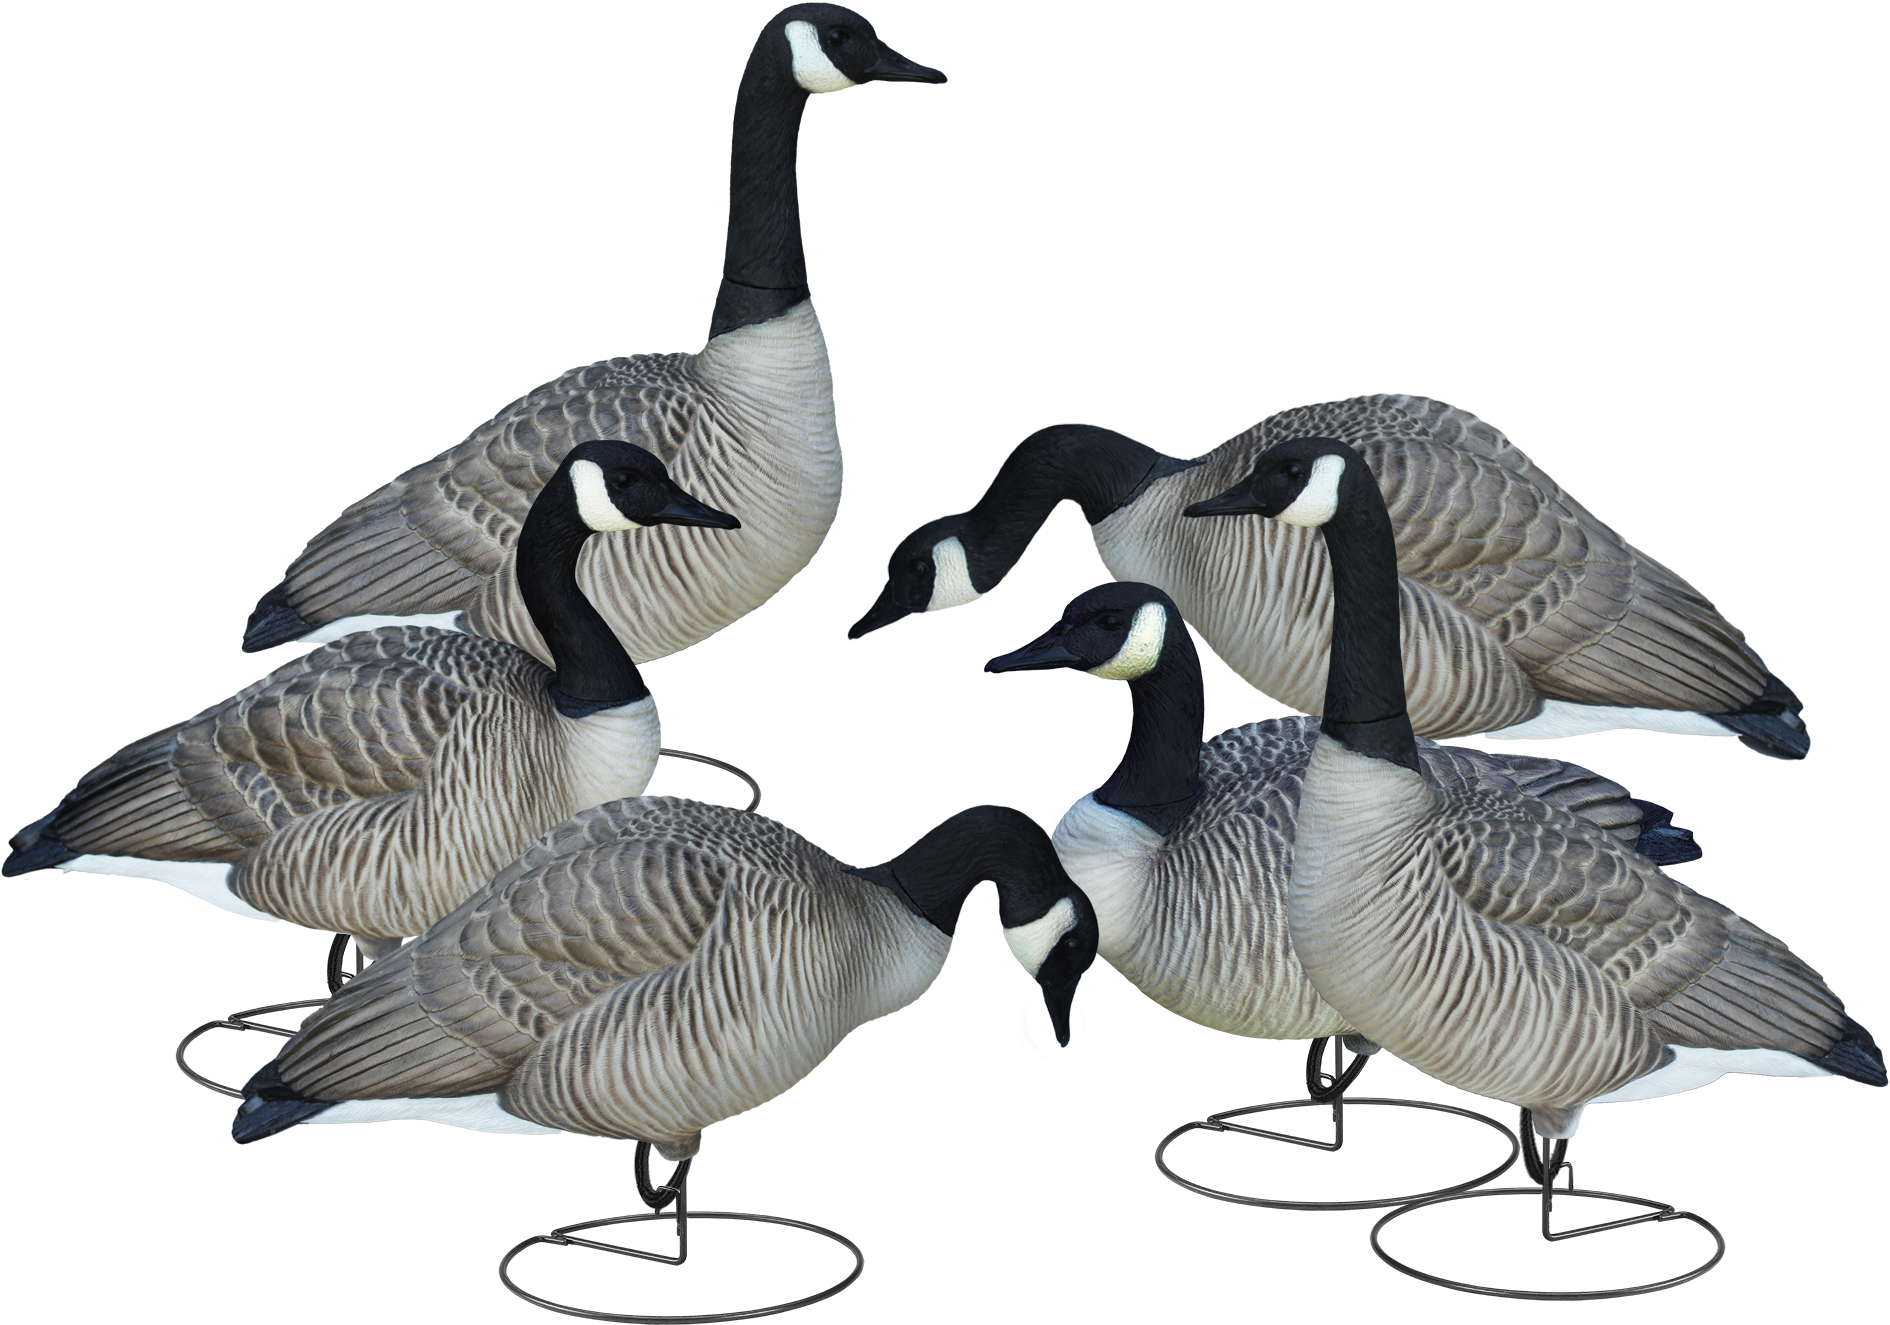 A Group Of Geese Standing On Metal Legs